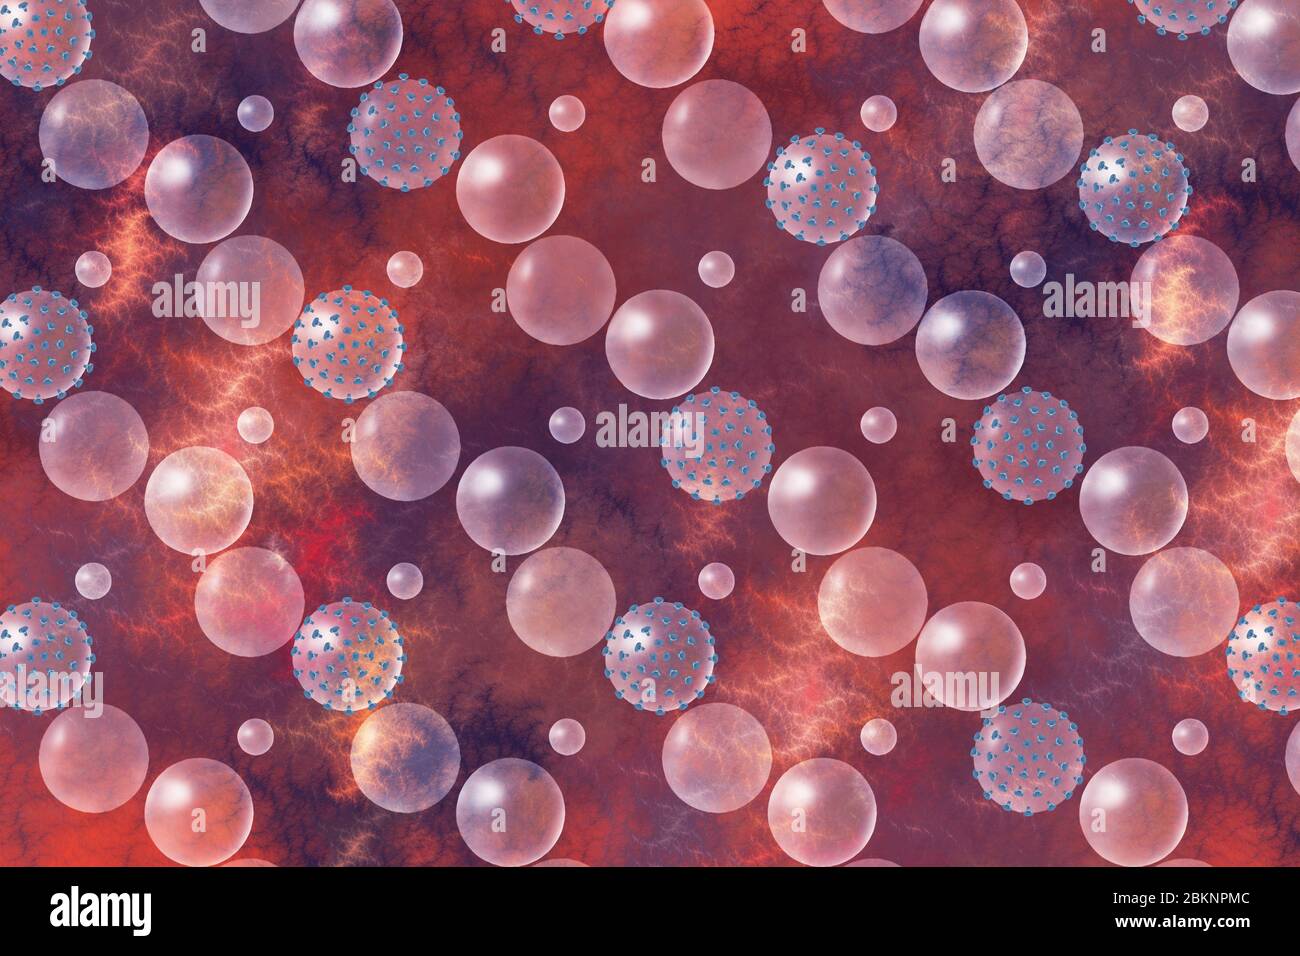 Abstract model of the infected cells. Chain spread of C-19 coronavirus Stock Photo